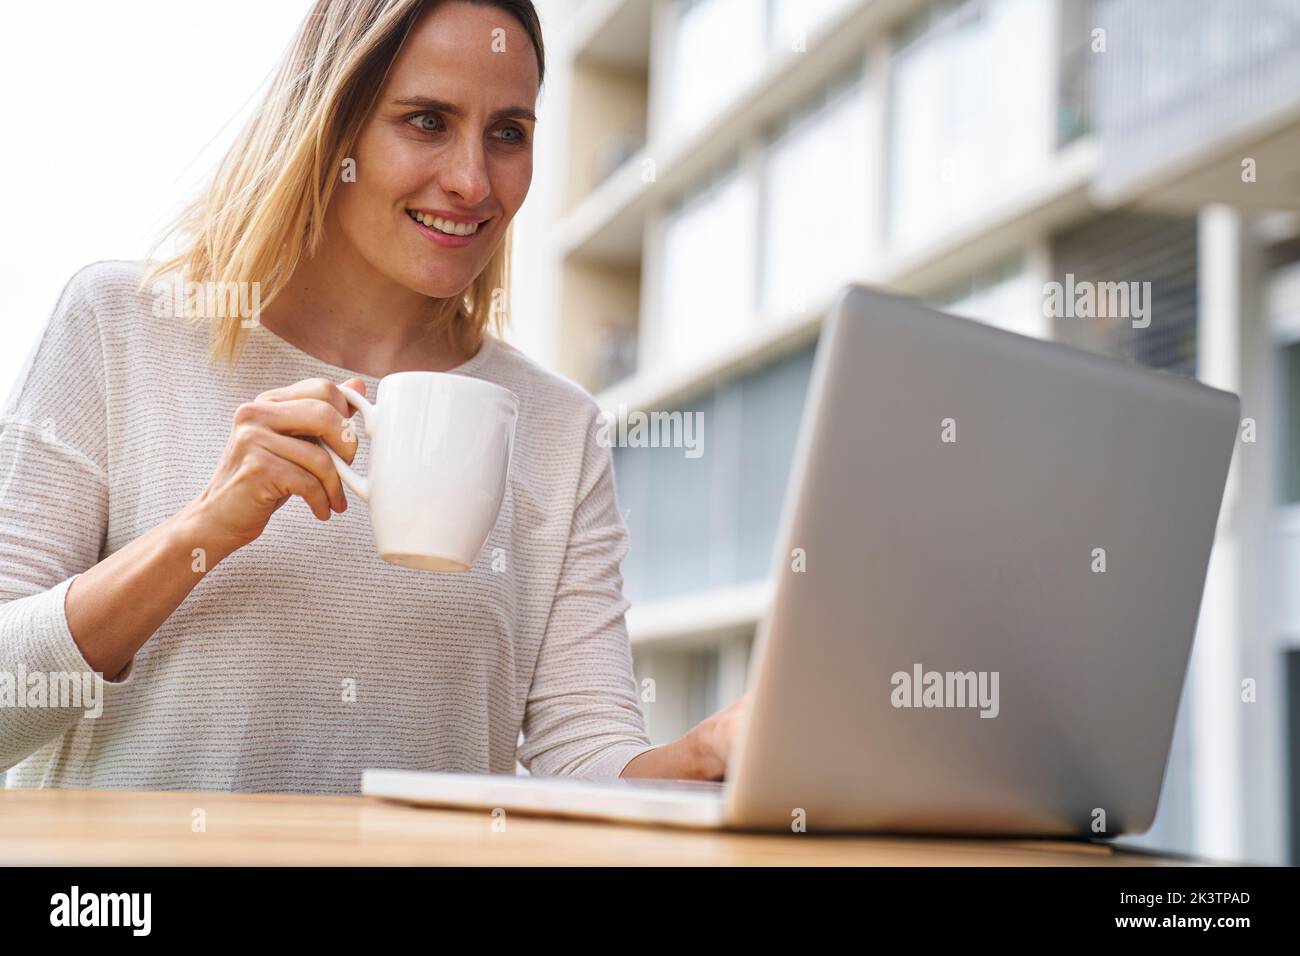 Low angle view of female entrpreneur looking at laptop screen and drinking coffee Stock Photo